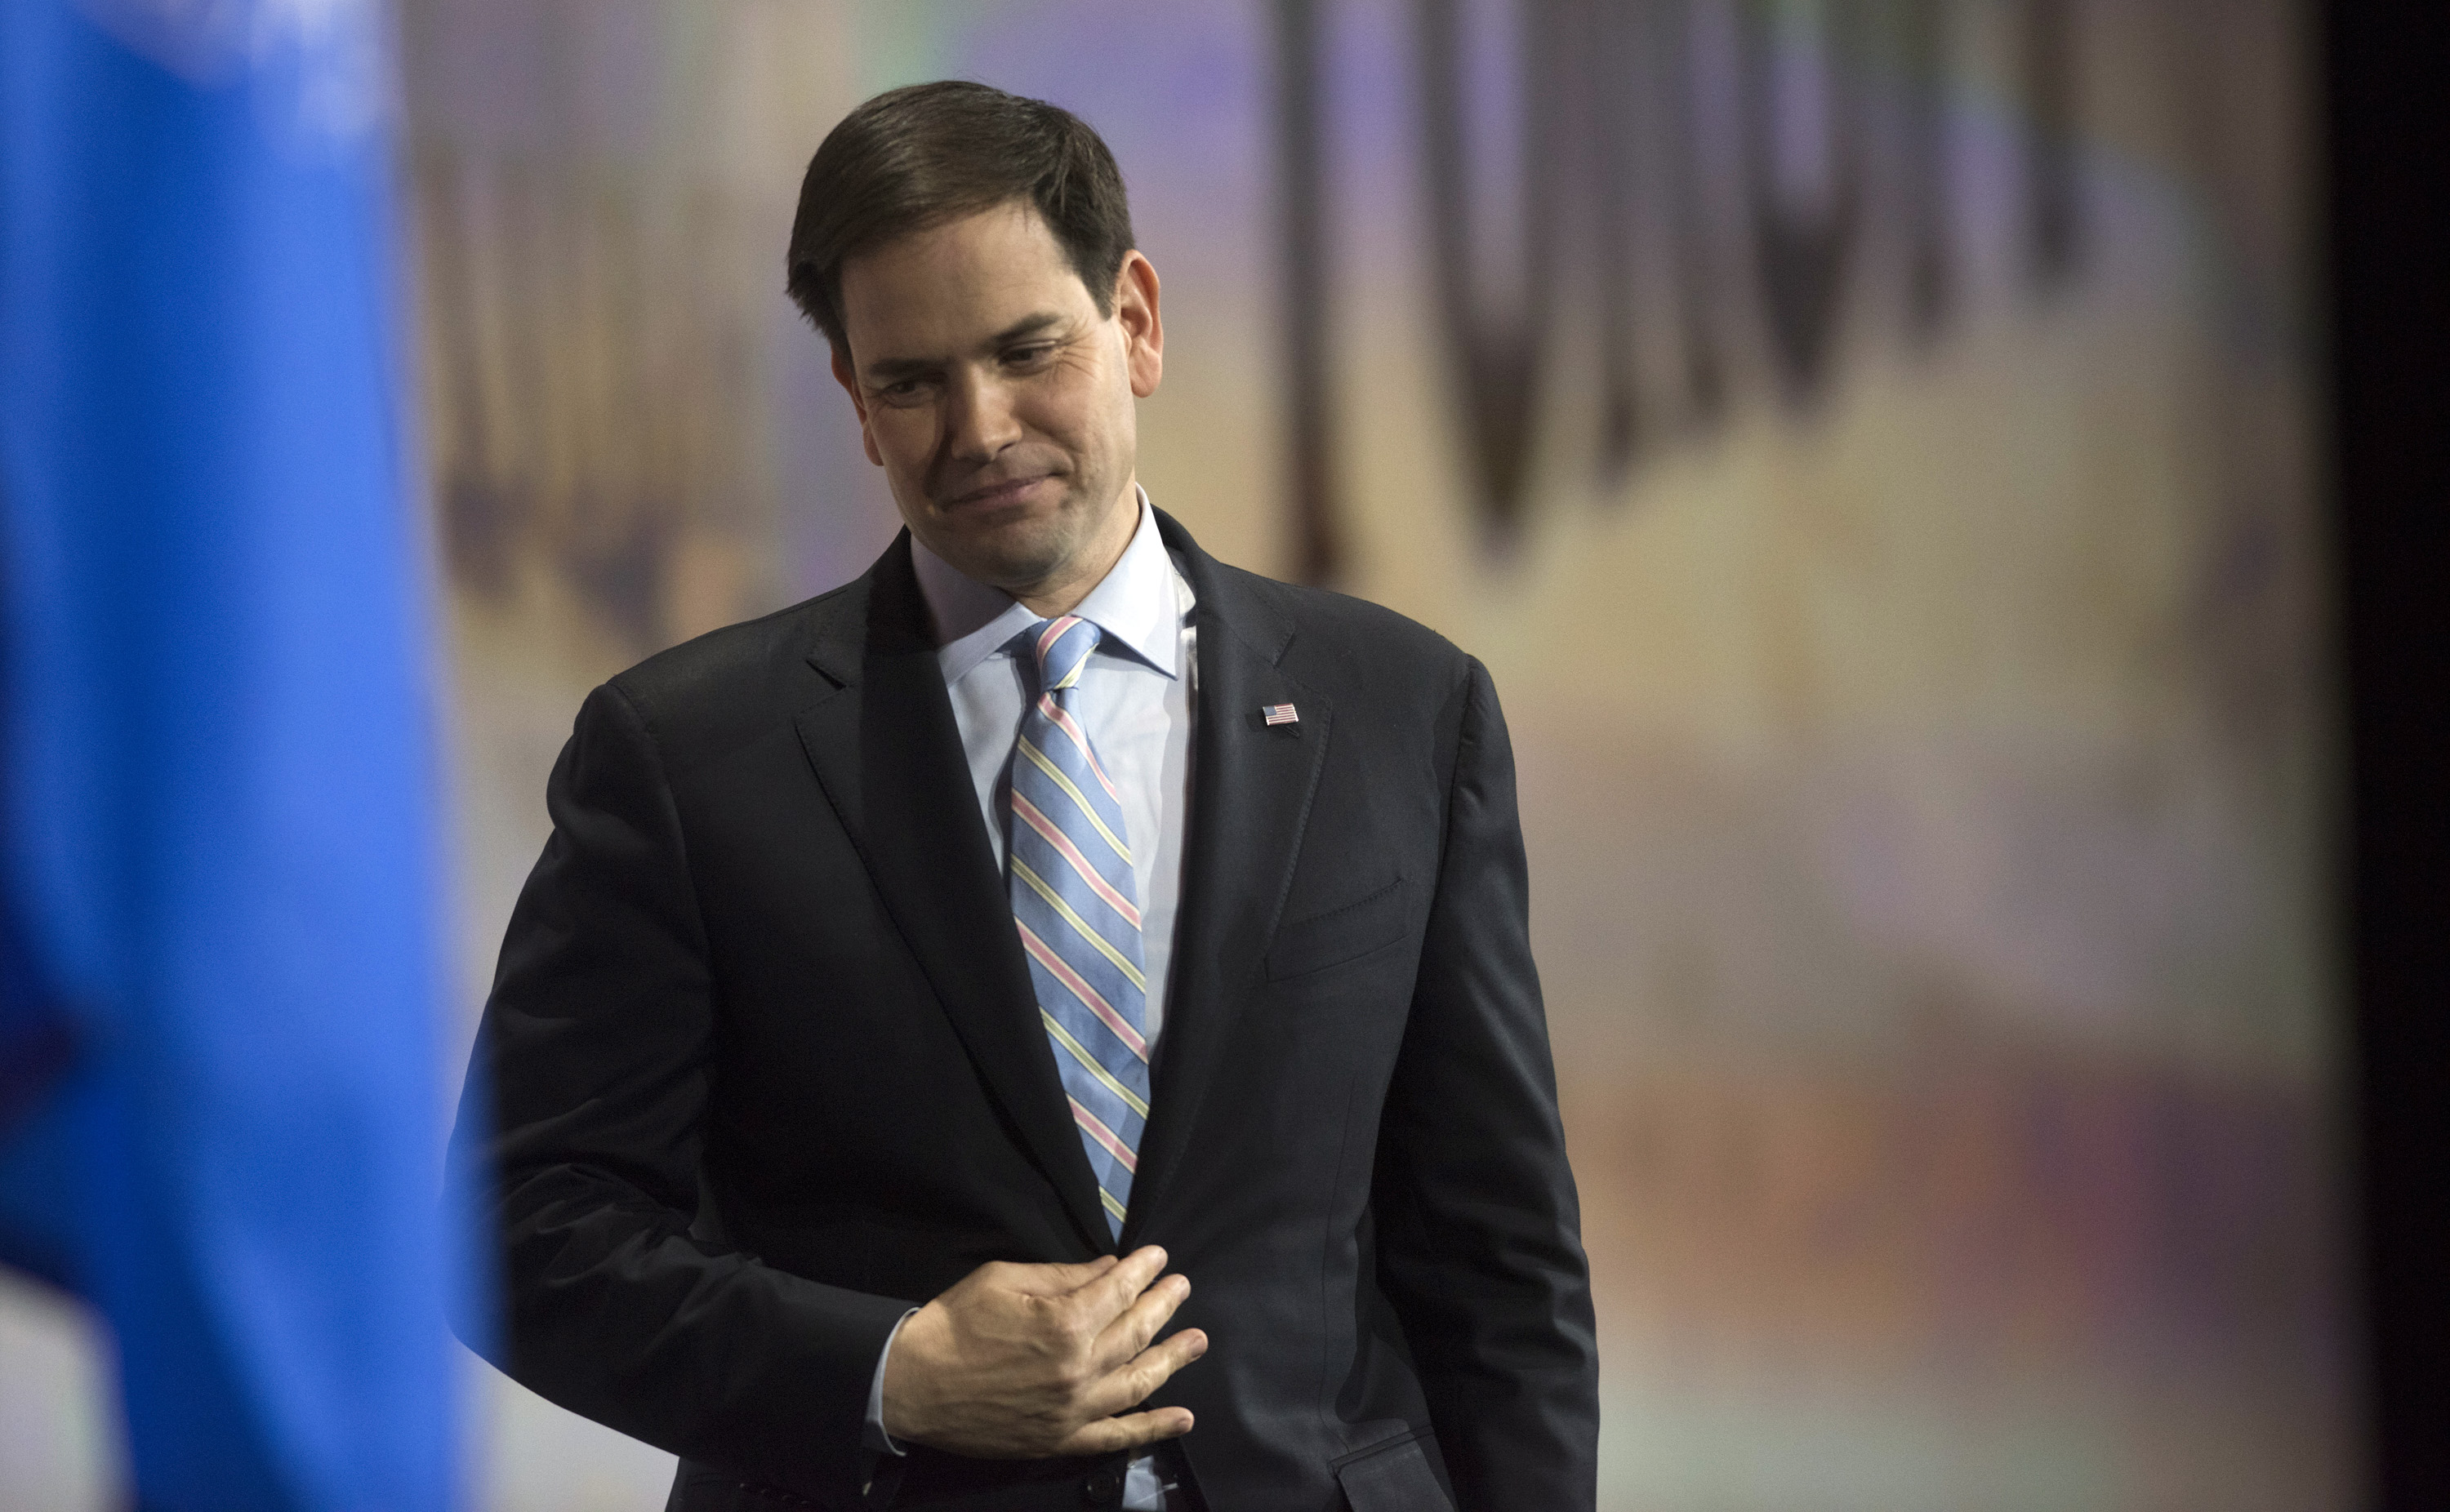 Senator Marco Rubio, a Republican from Florida, exits after speaking during the Leadership Forum at the 144th National Rifle Association Annual Meetings and Exhibits in Nashville, Tennessee, on April 10, 2015.
